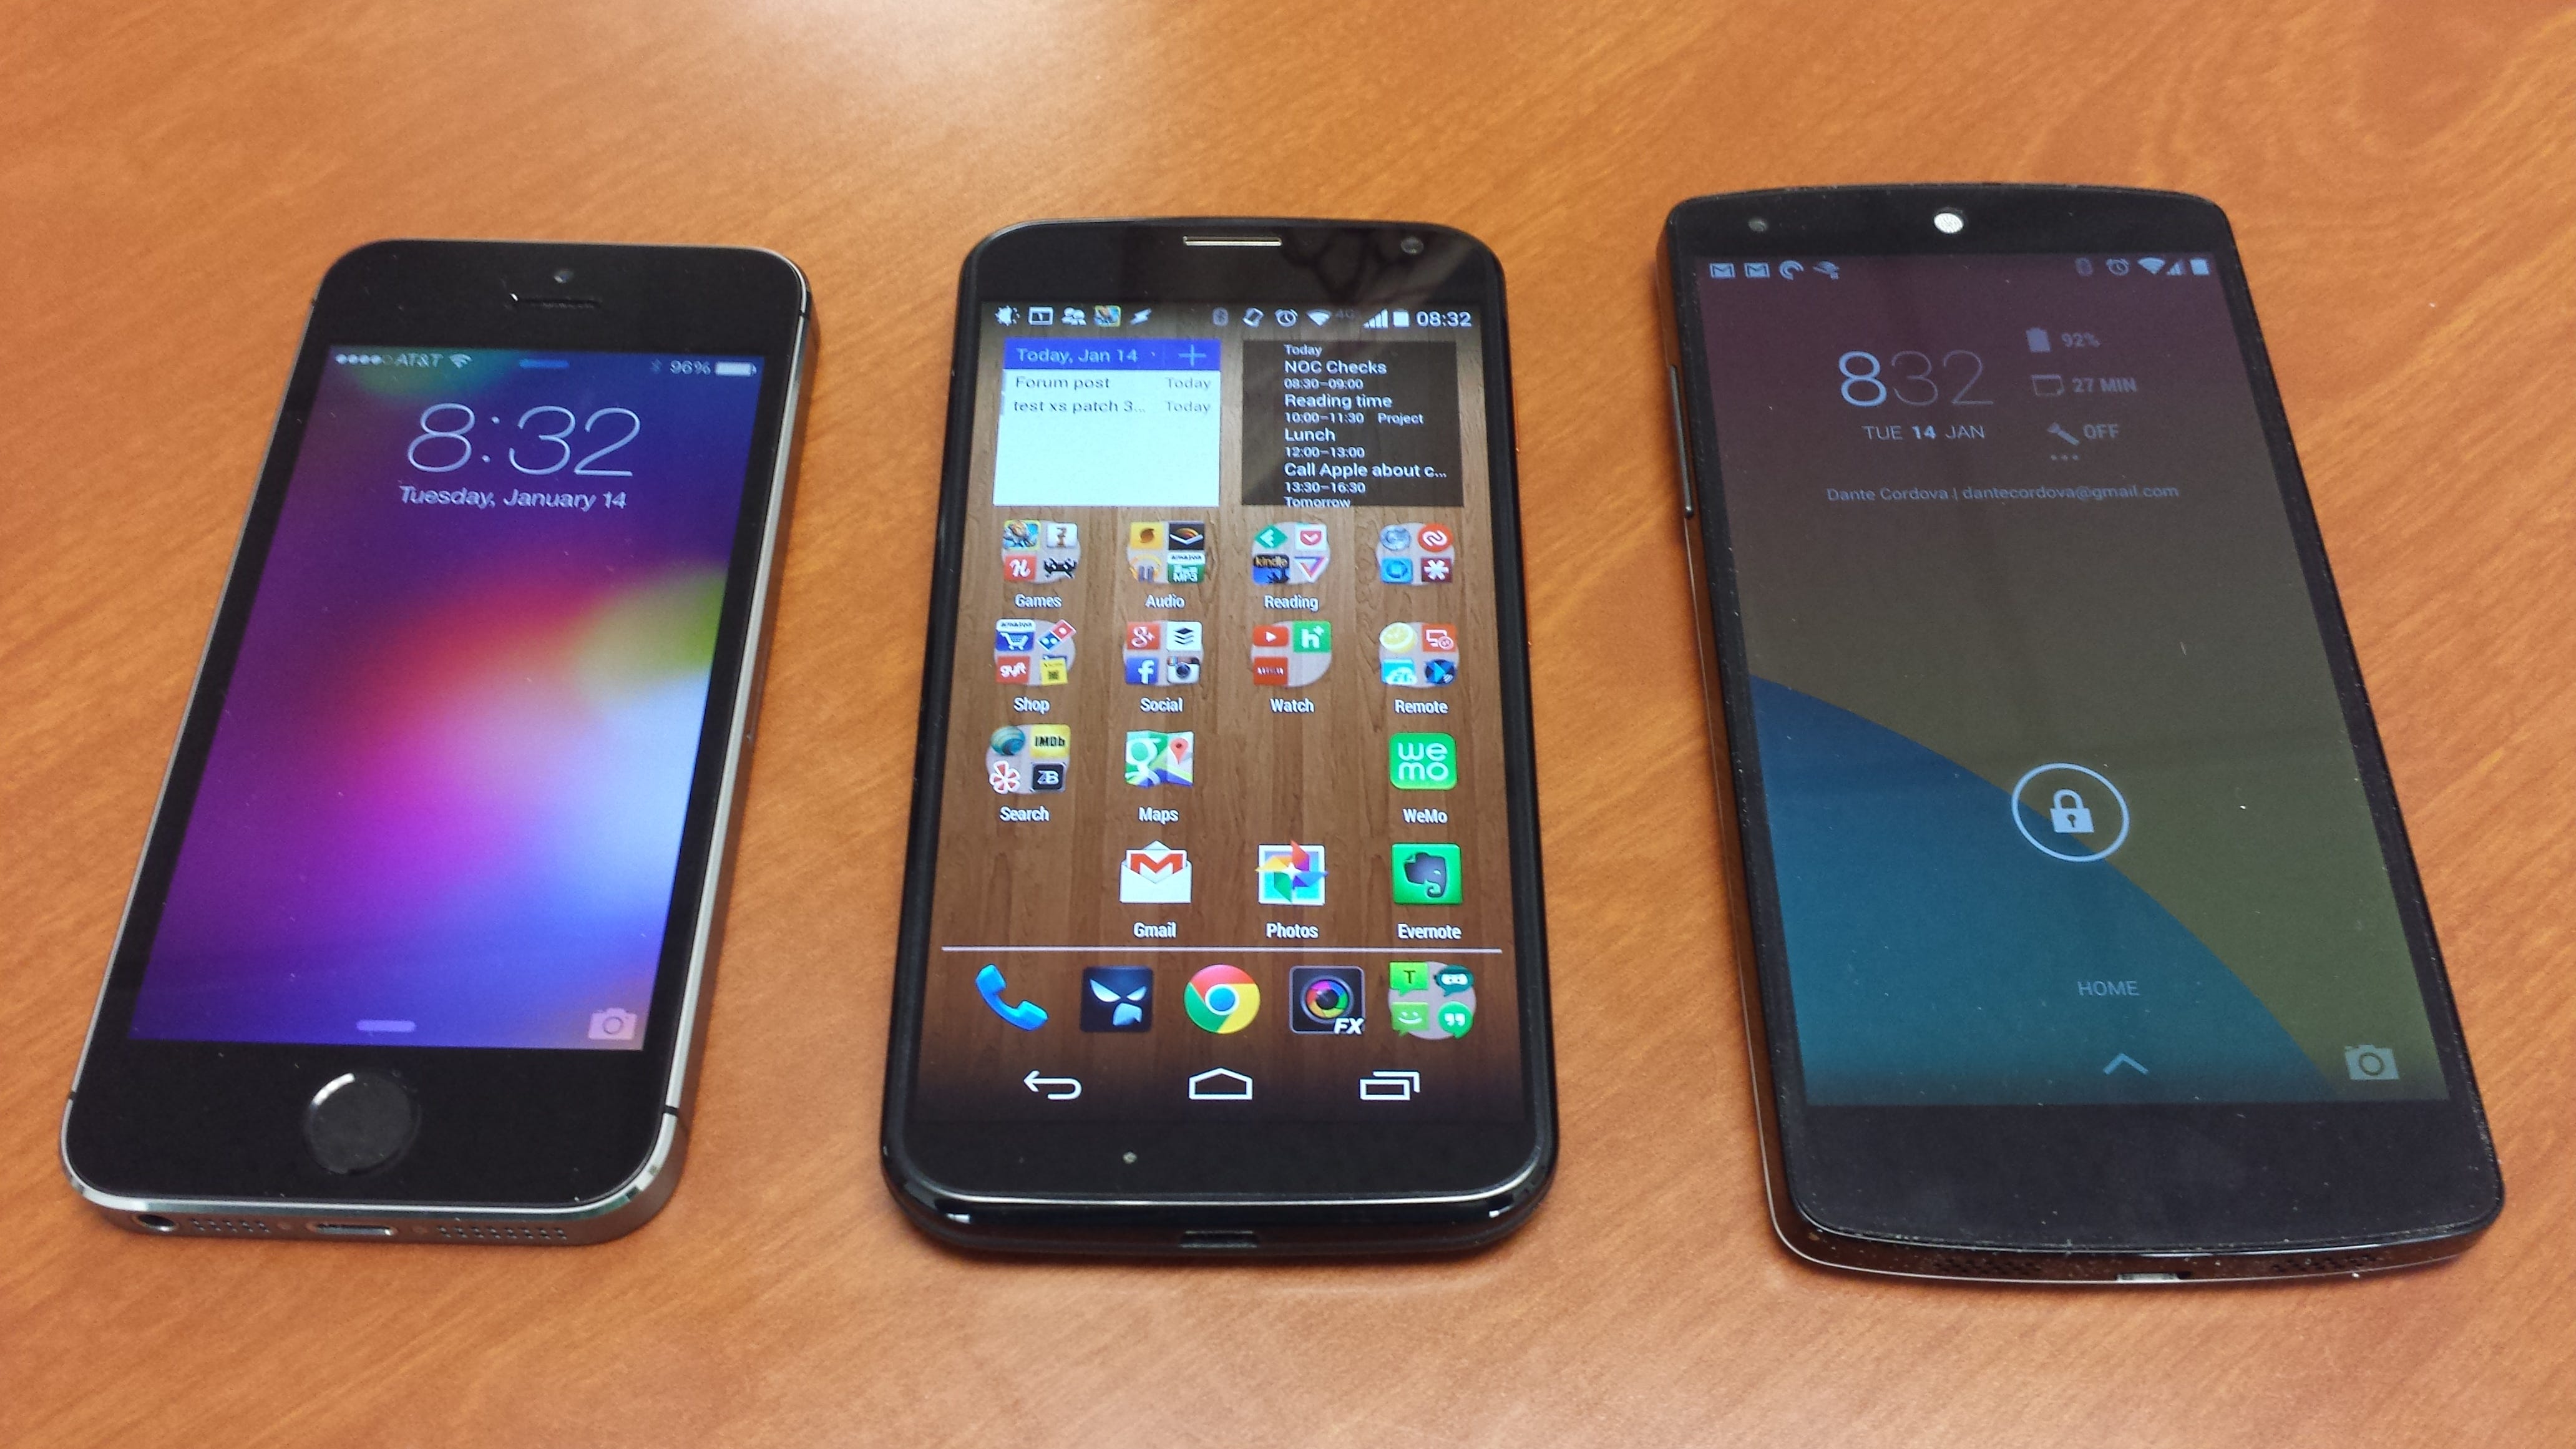 Nexus 5 or Moto X? Review and Comparisons from a Past iPhone User